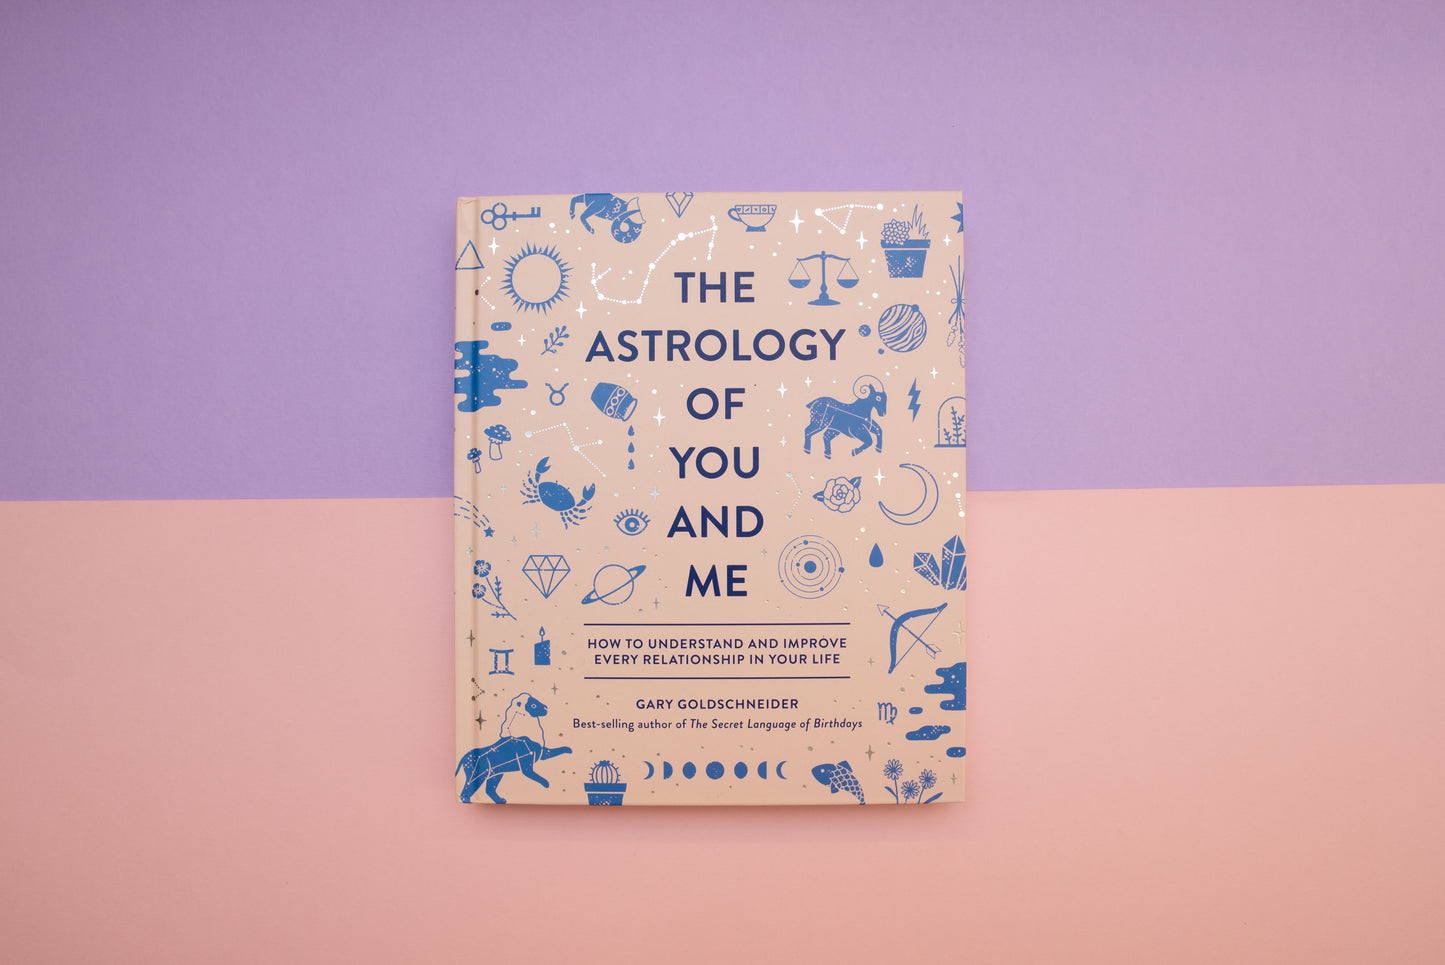 The Astrology of You and Me - by Gary Goldschneider